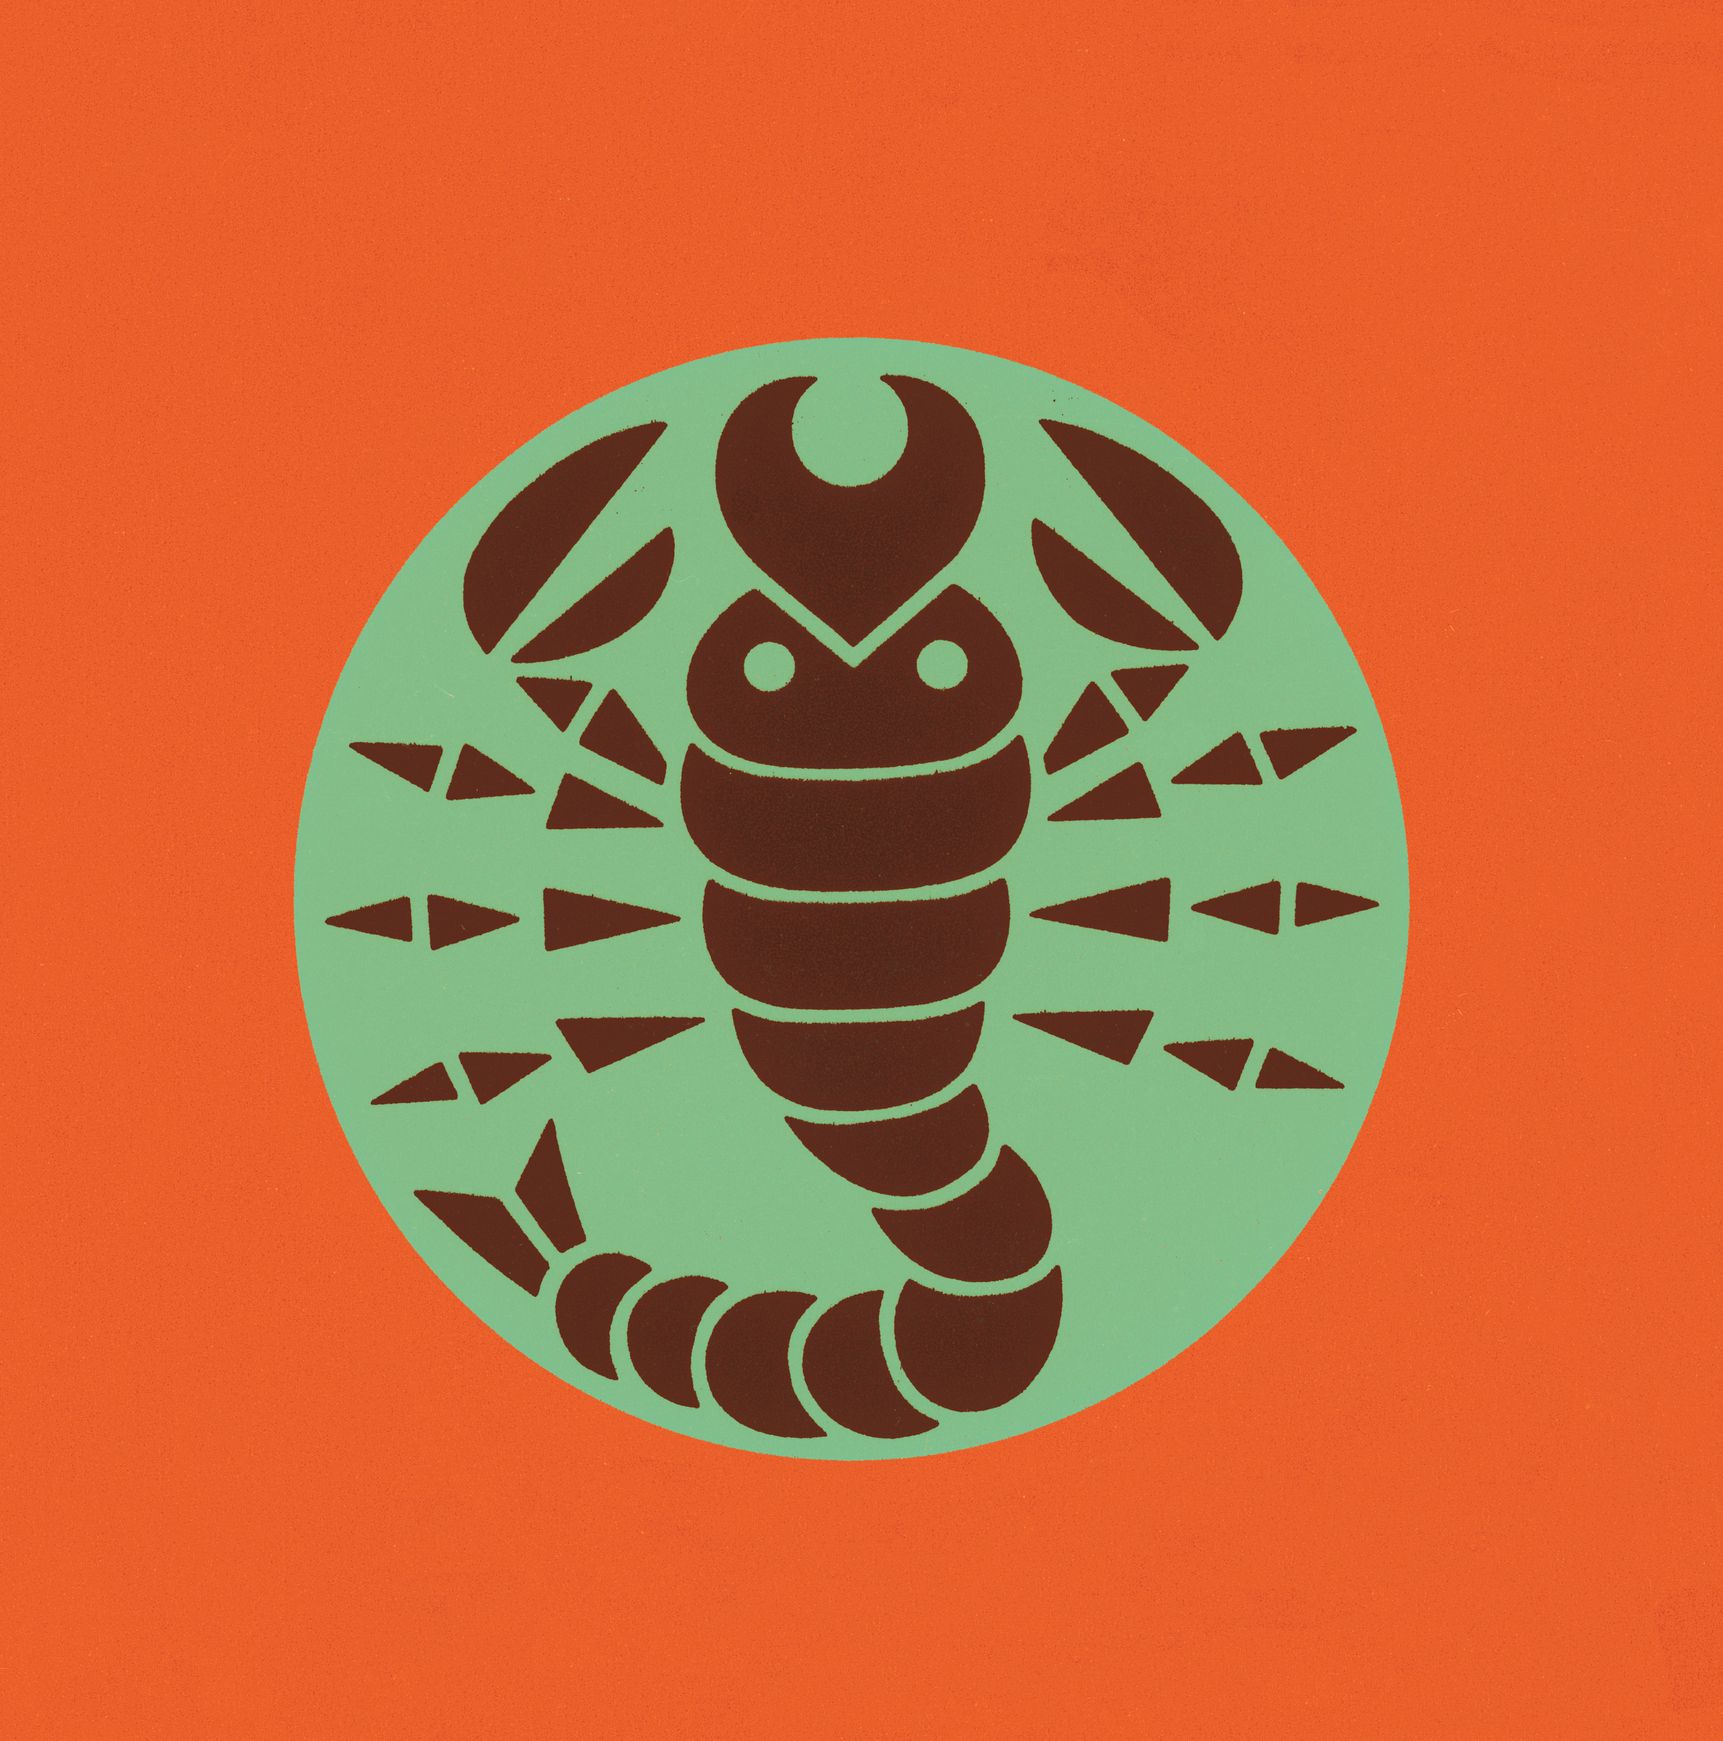 Image of a Scorpio zodiac sign. | Source: Getty Images